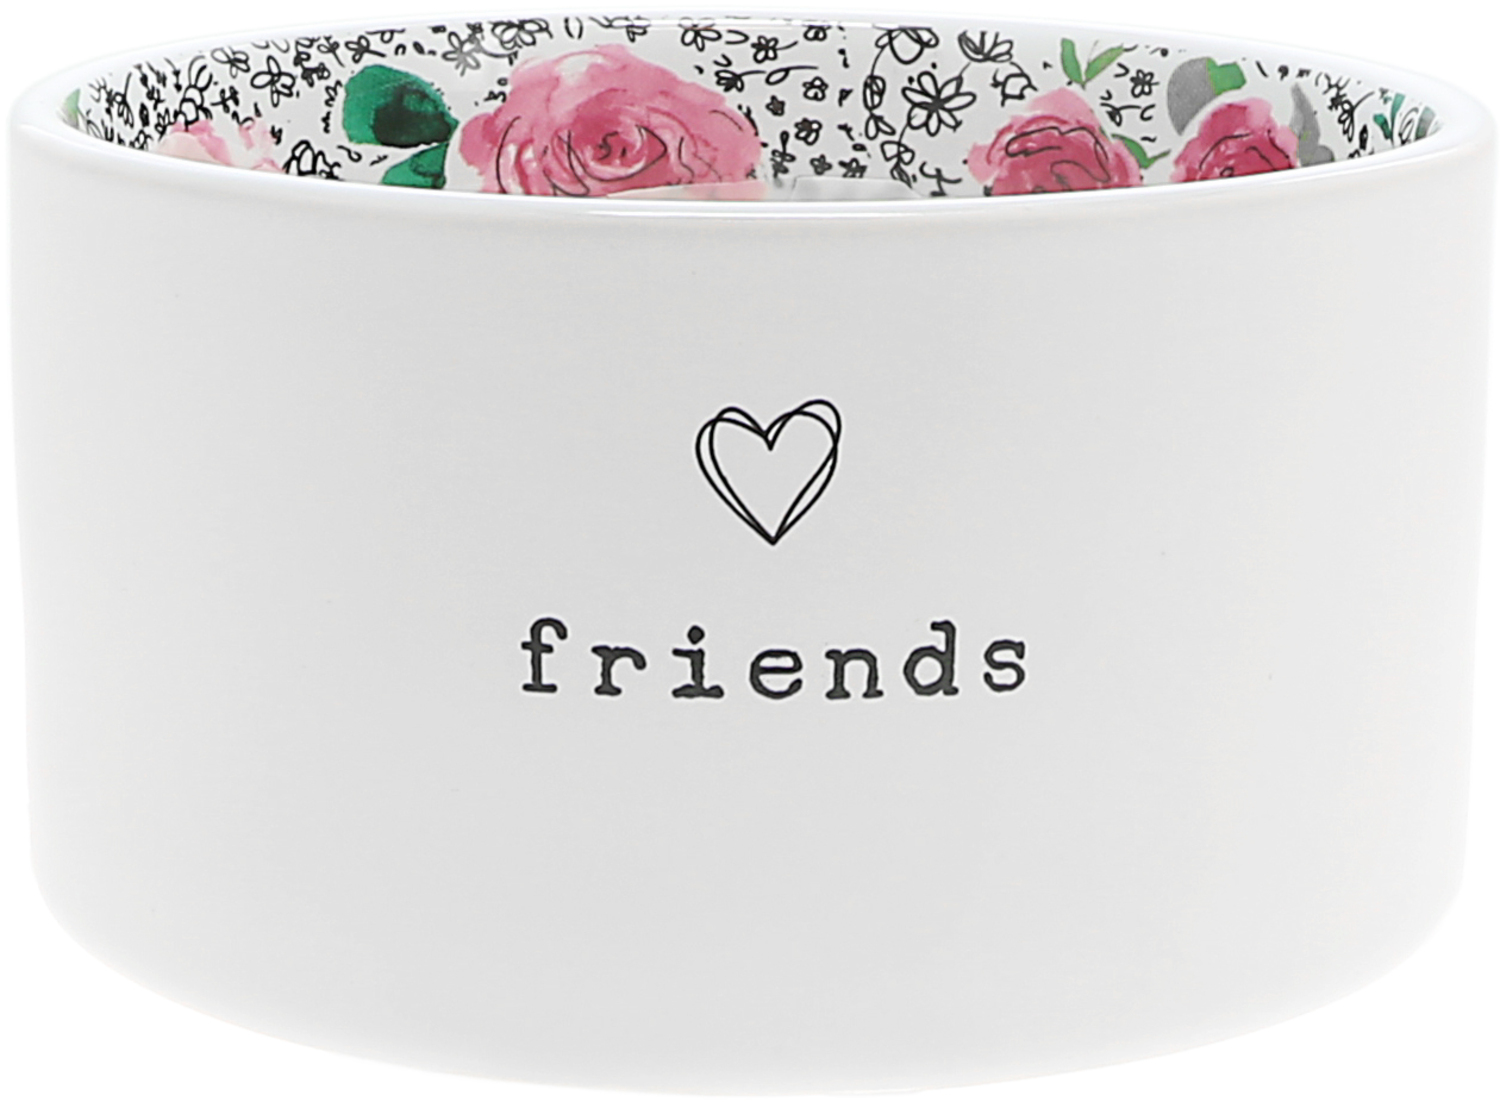 Friends by You Make Me Smile -ALW - Friends - 10 oz 100% Soy Wax Reveal, Triple Wick Candle Scent: Tranquility